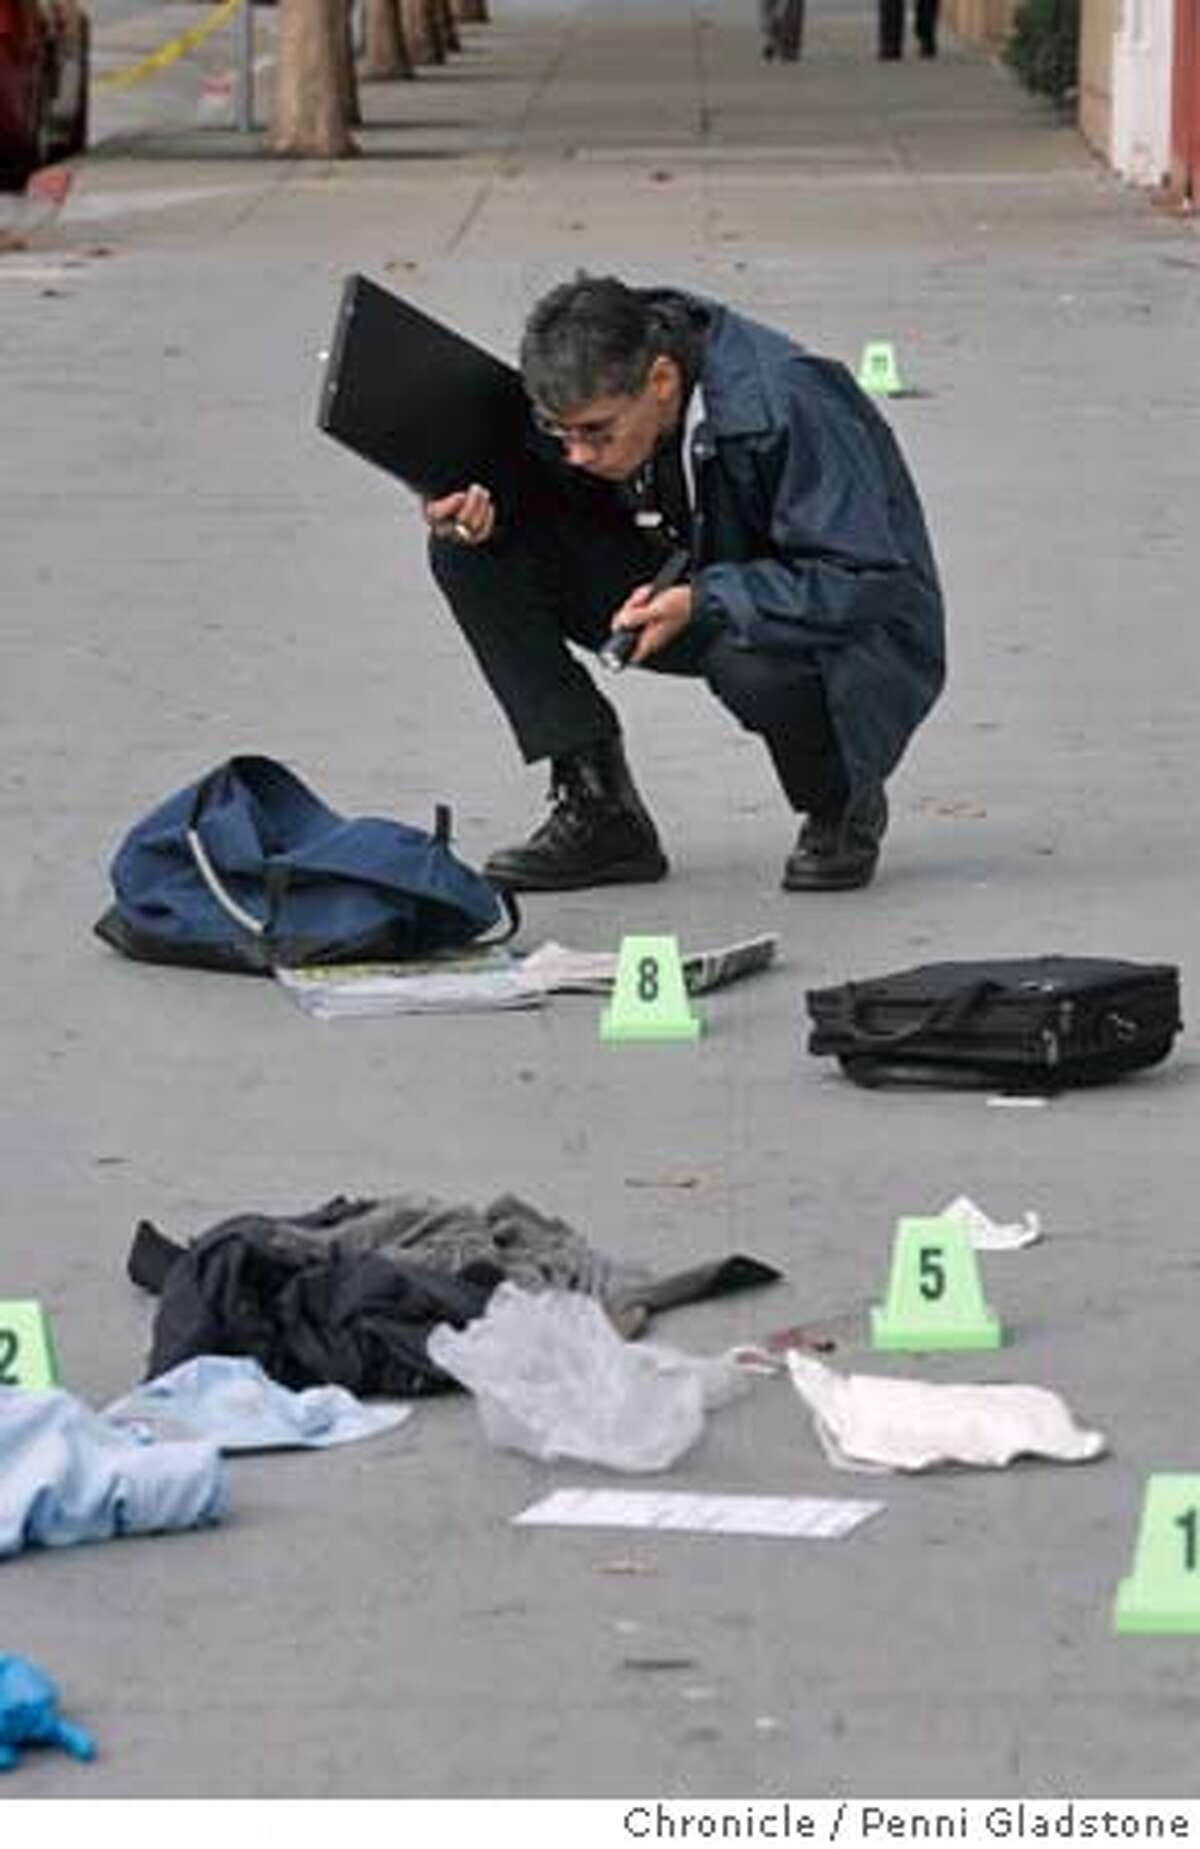 MURDER_0063_PG.JPG Crime Scene Investigator (CSI) Dave Kamita takes notes of victims things on the ground, uses his flashlight to see better. MURDER at Jackson and Polk. next to Lombardi's sporting goods. A person shot another then shot himself. San Francisco Chronicle, Penni Gladstone Photo taken on 10/27/05, in San Francisco,